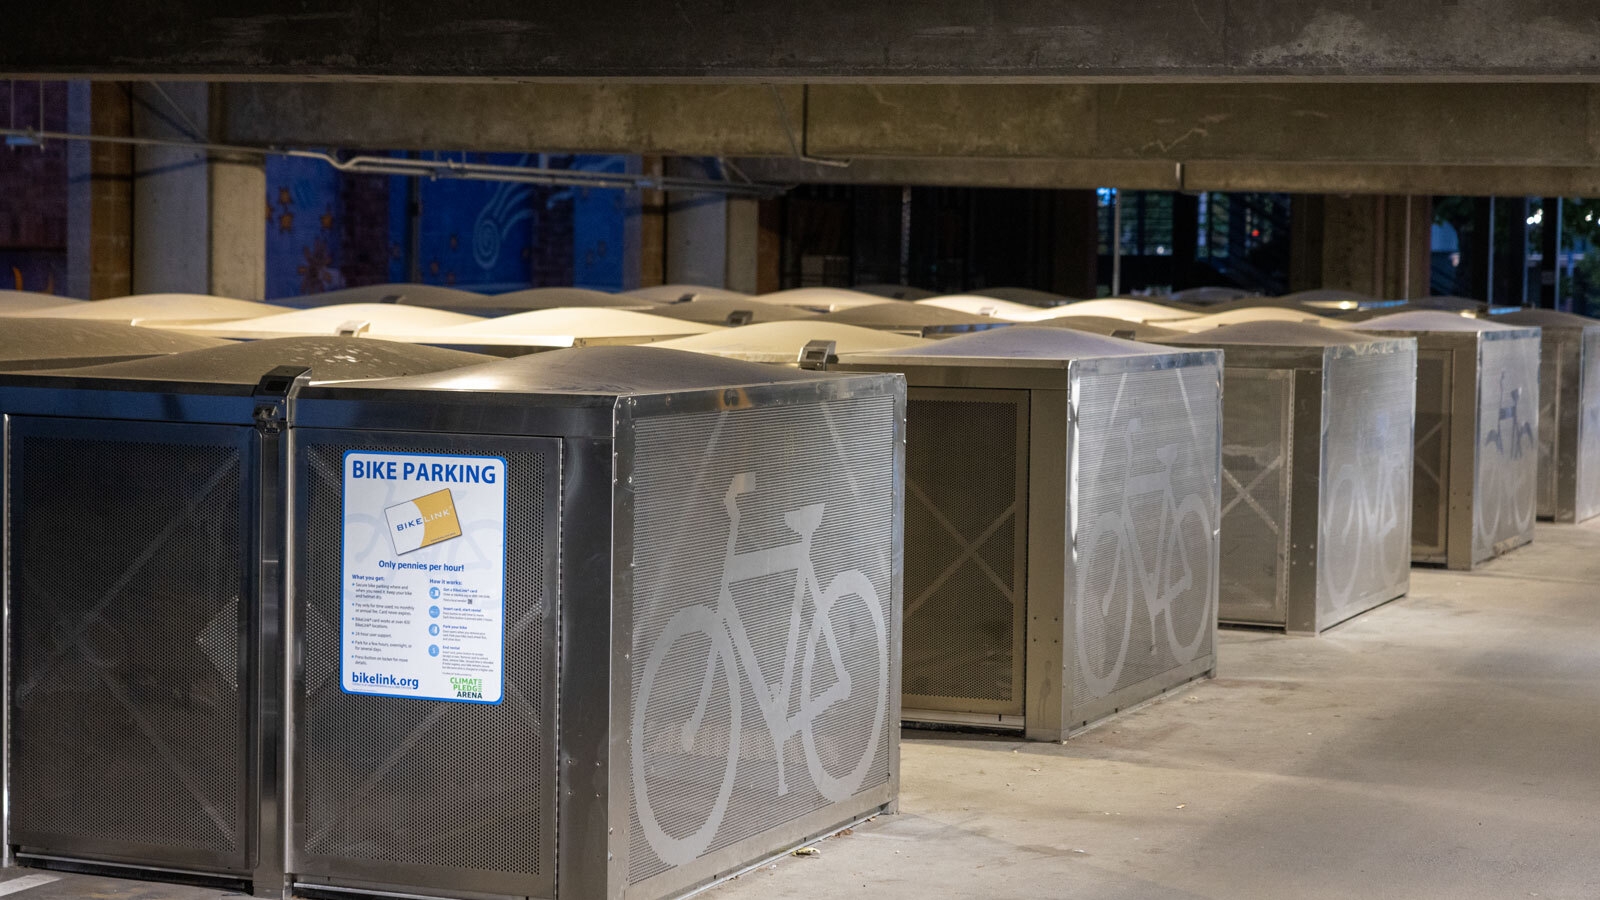 an image of several large, metal boxes with bicycle symbols painted on them. there is a sign showing that they are for bike parking.